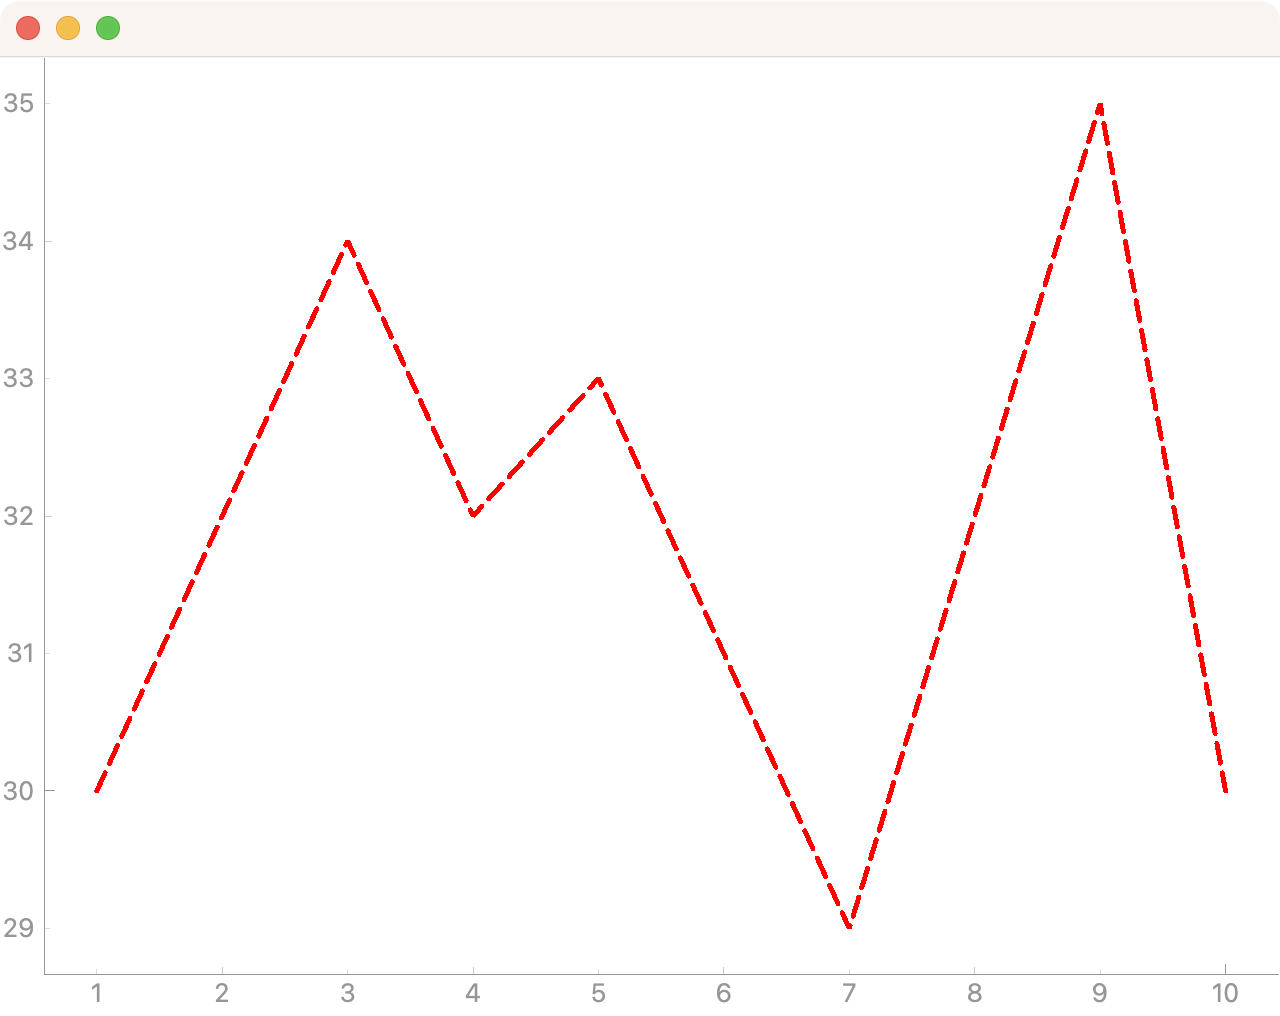 PyQtGraph plot with a red, dashed, and 5-pixel line